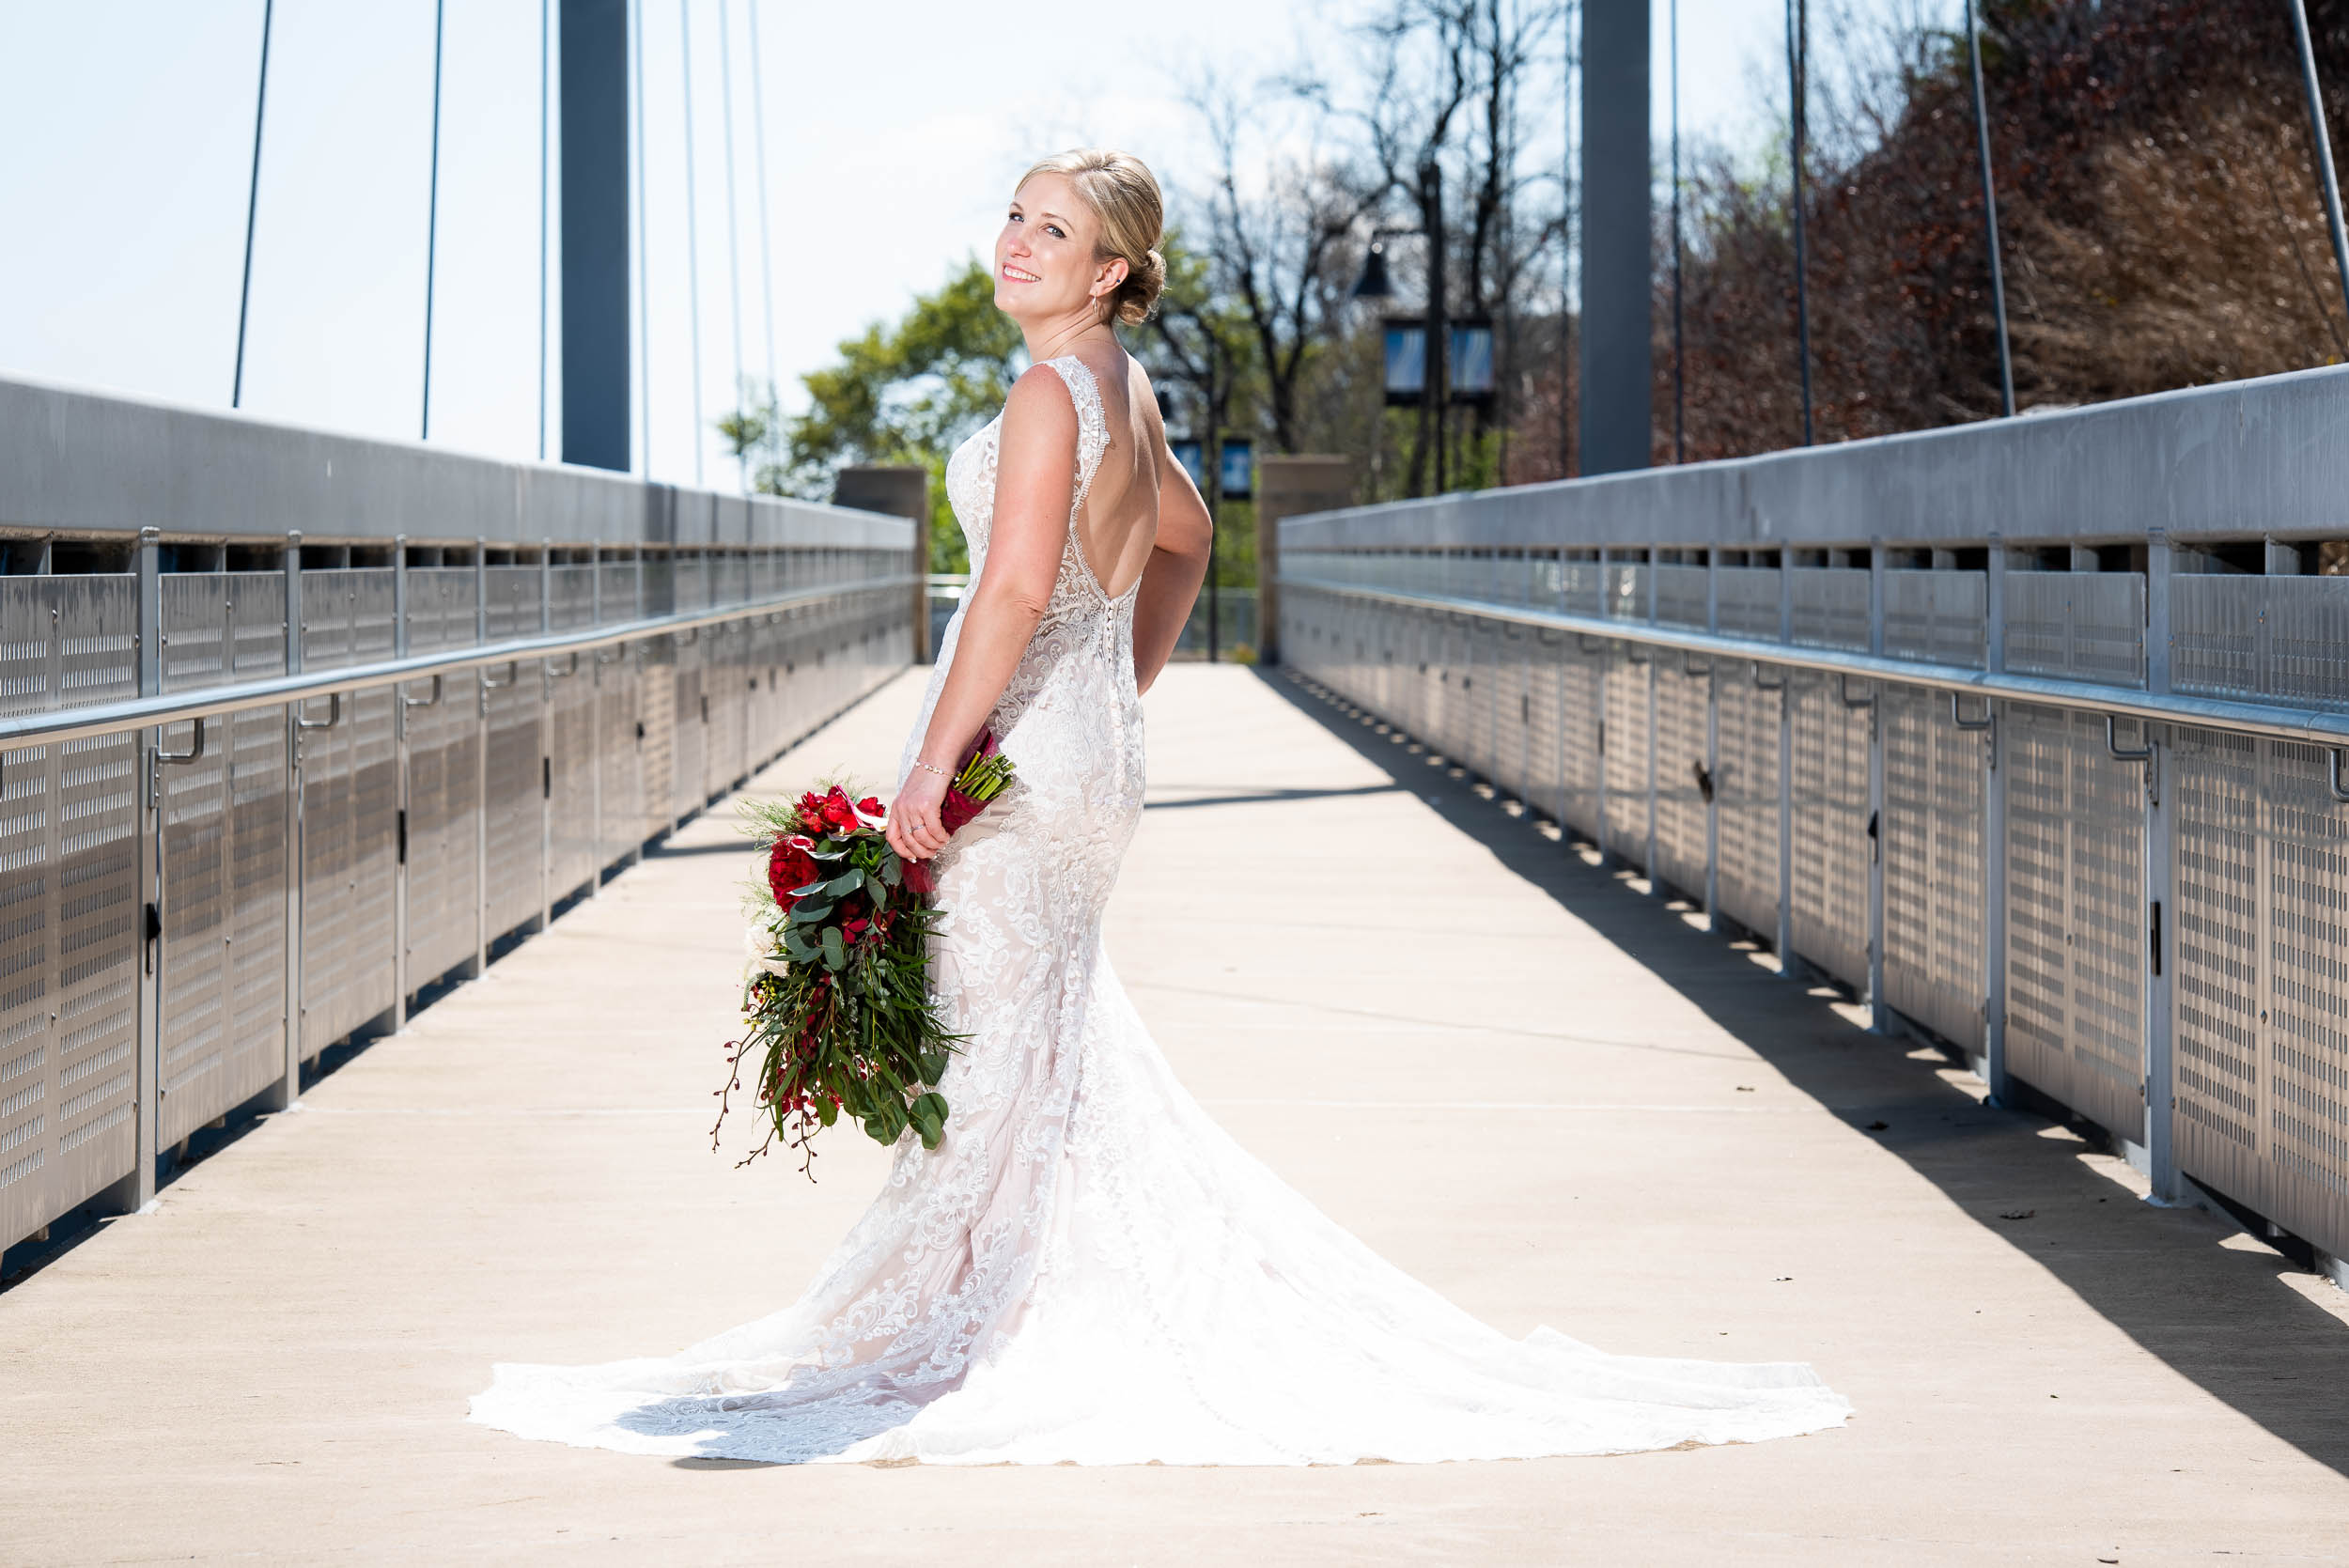 Bridal portrait: Modern industrial Chicago wedding inside Prairie Street Brewhouse captured by J. Brown Photography. Find more wedding ideas at jbrownphotography.com!